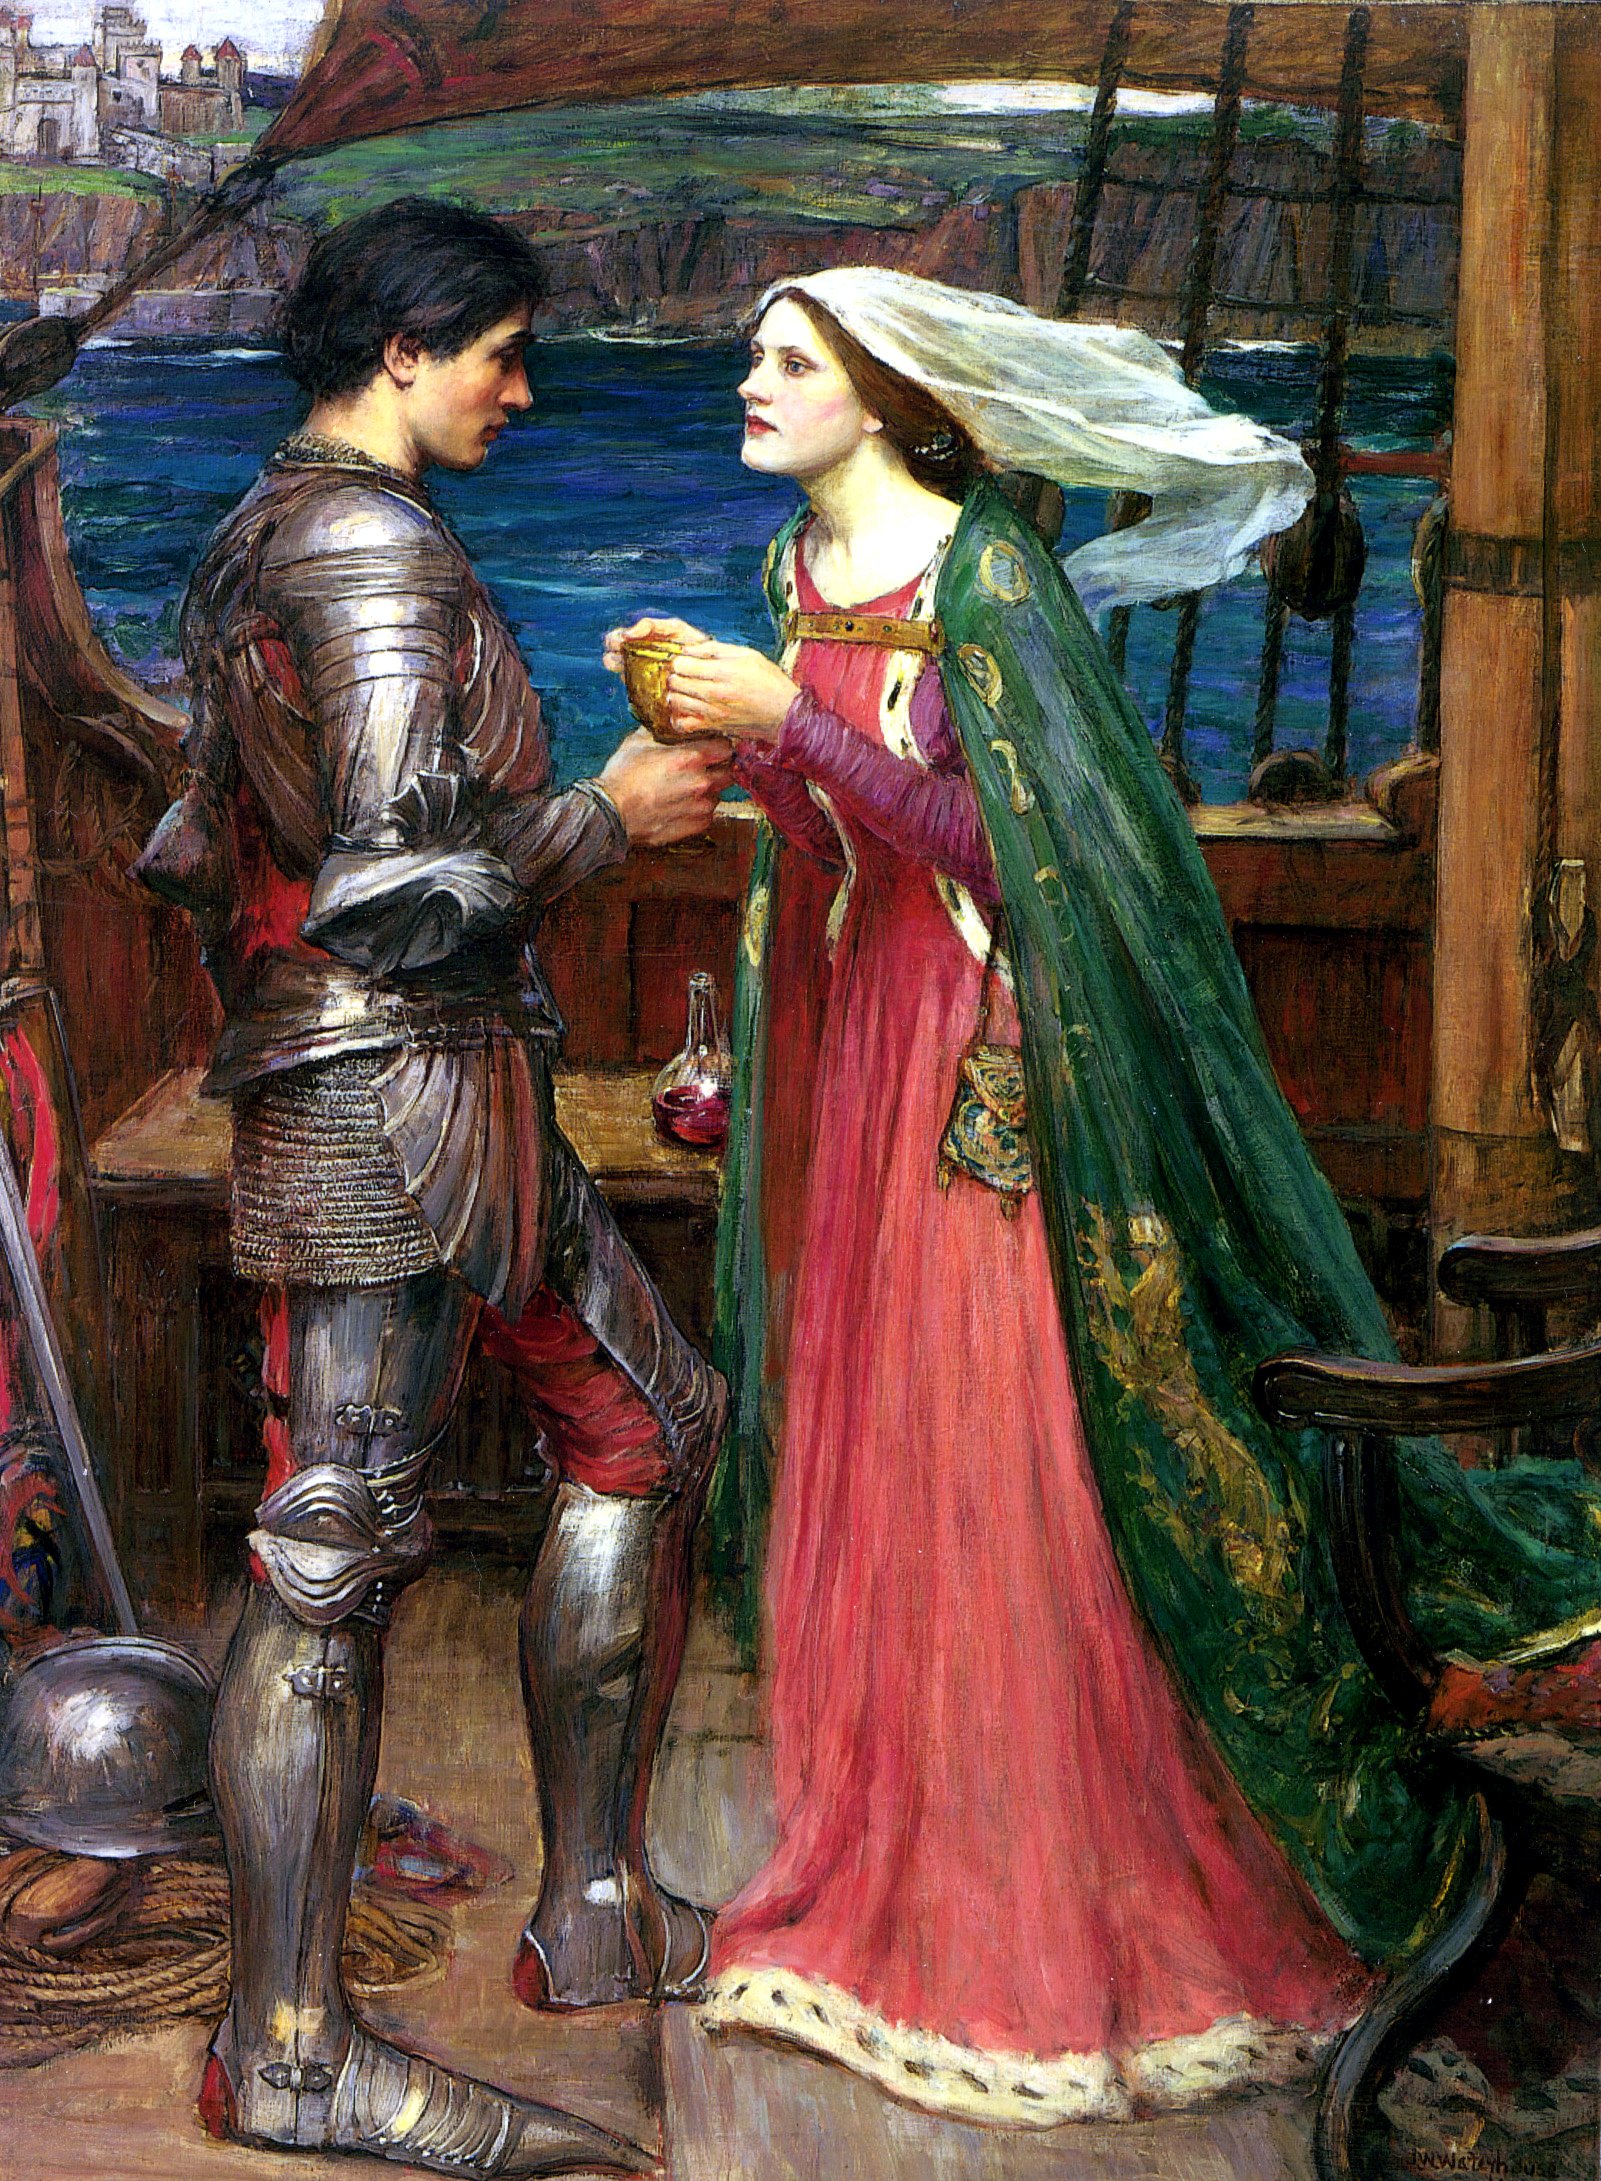 Tristan and Isolde with the Potion, oil on canvas by John William Waterhouse 1849-1917 Google image from https://pixels.com/featured/1-tristram-and-isolde-john-william-waterhouse.html